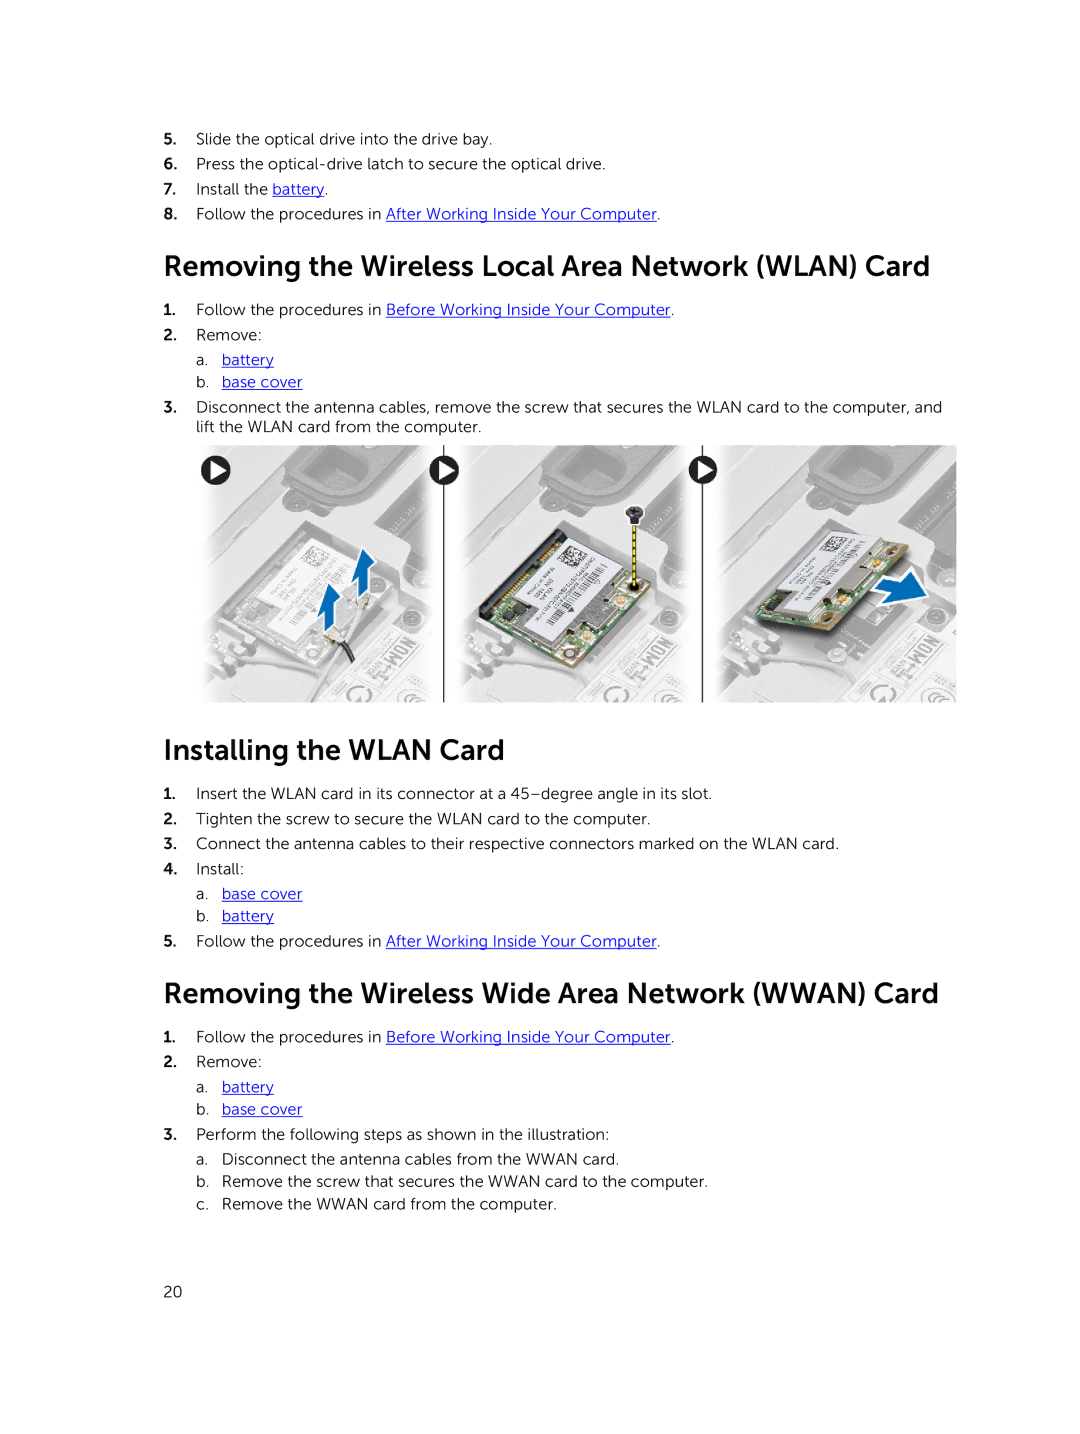 Dell M2800 owner manual Removing the Wireless Local Area Network Wlan Card, Installing the Wlan Card 